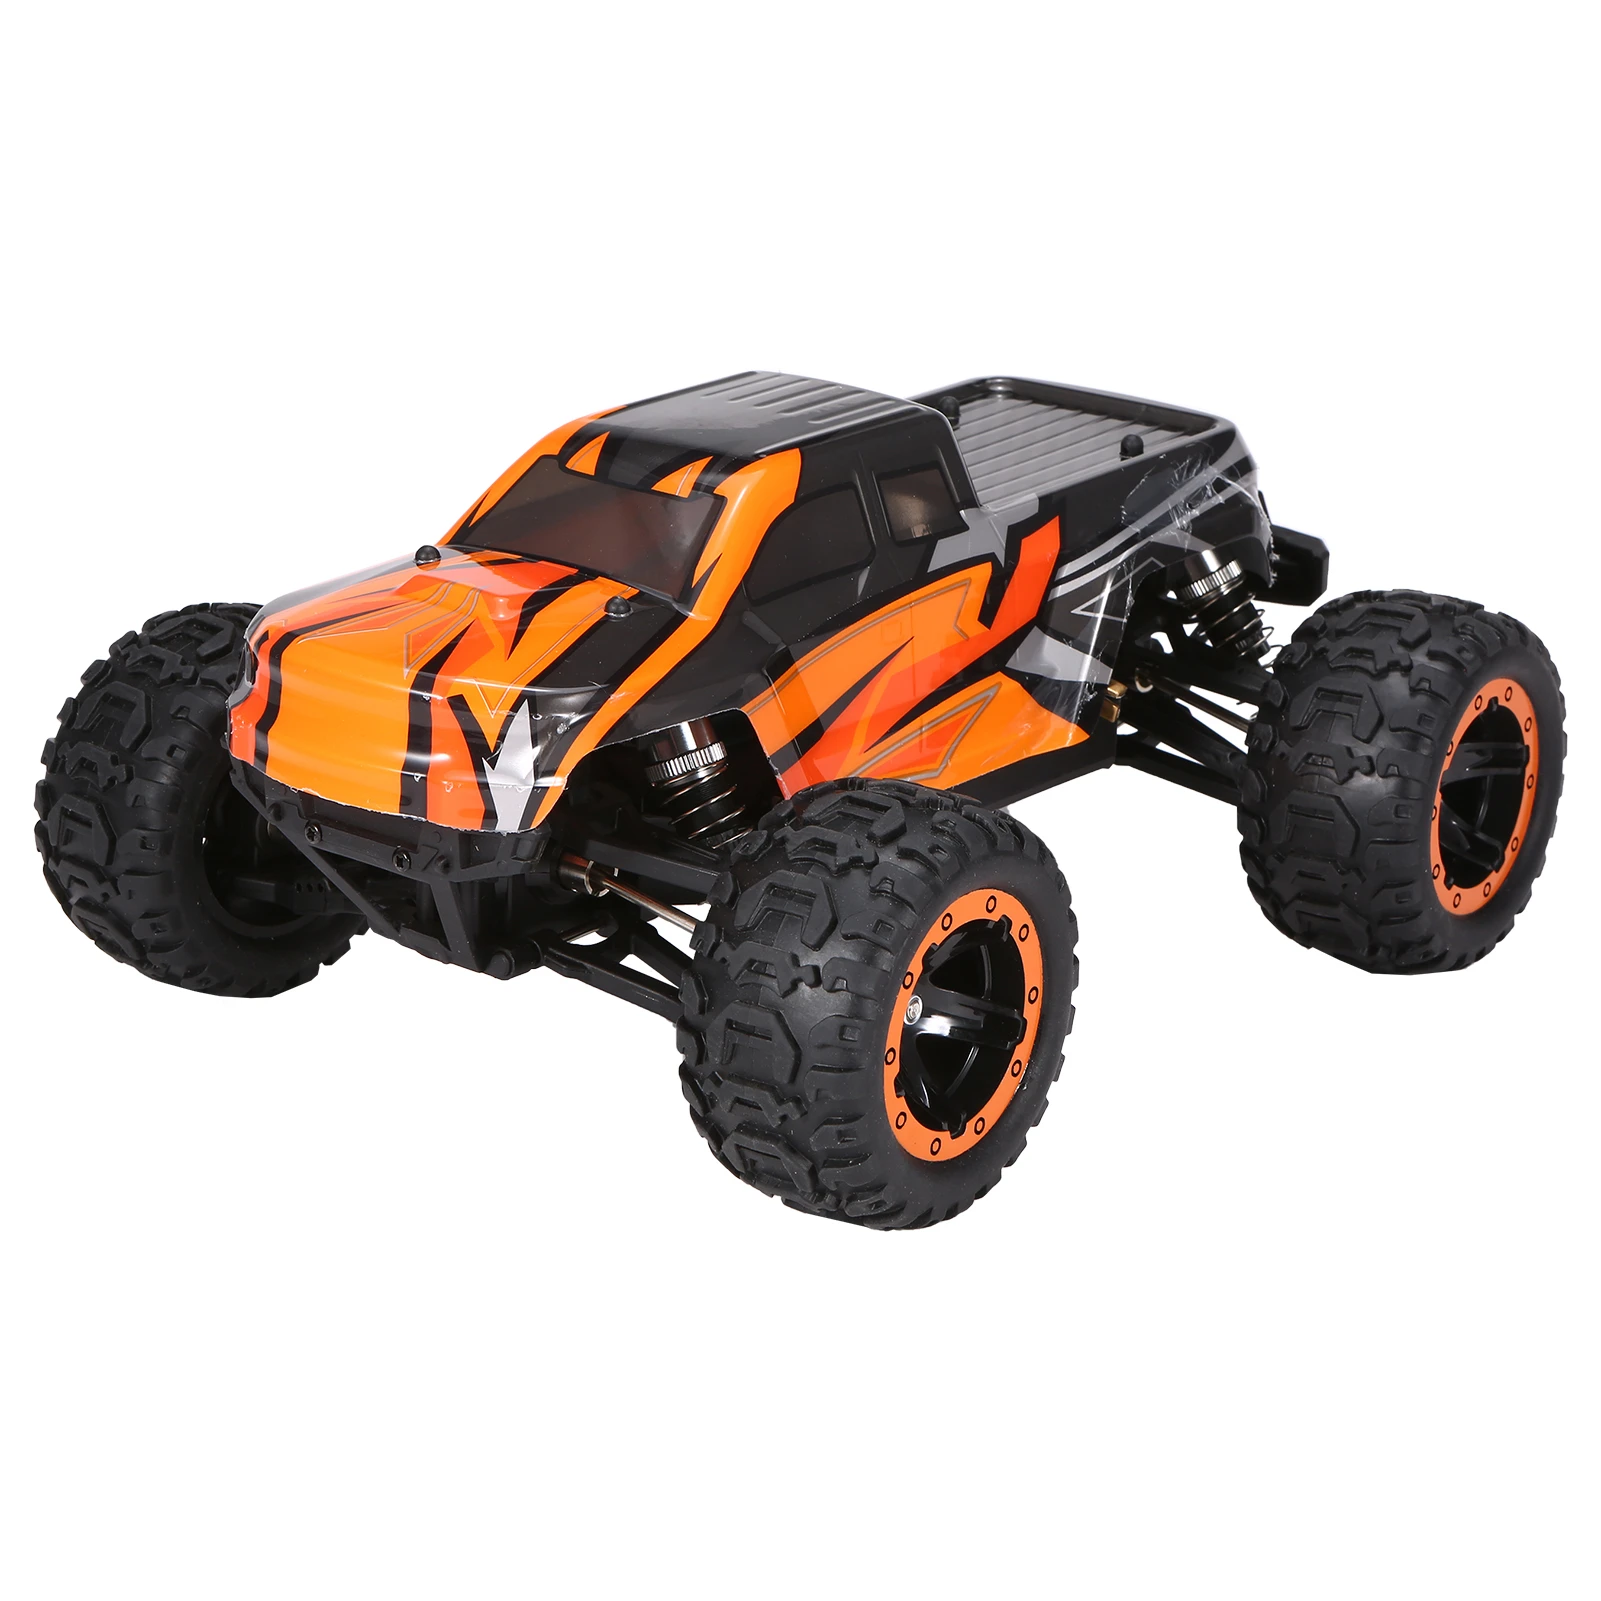 remote control stunt car 16889A-Pro 1:16 RC Car 4WD Big Foot RC Car 45 Km/h High Speed 2840 Brushless Motor 4X4 Waterproof Off-Road Truck Toys For Adult remote control cars & trucks